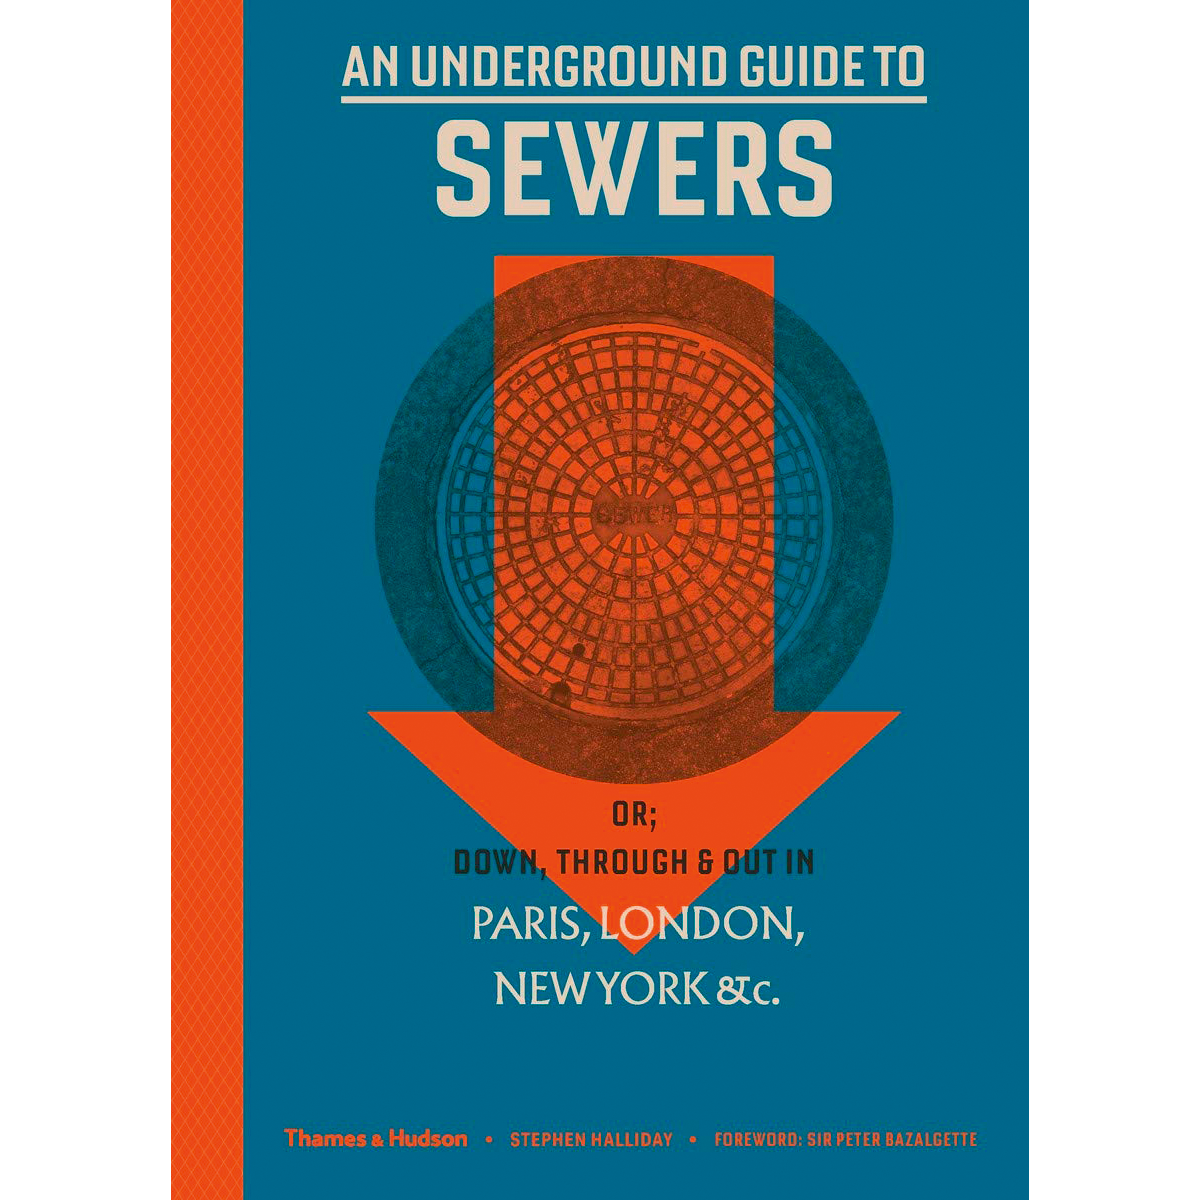 An Underground Guide to Sewers